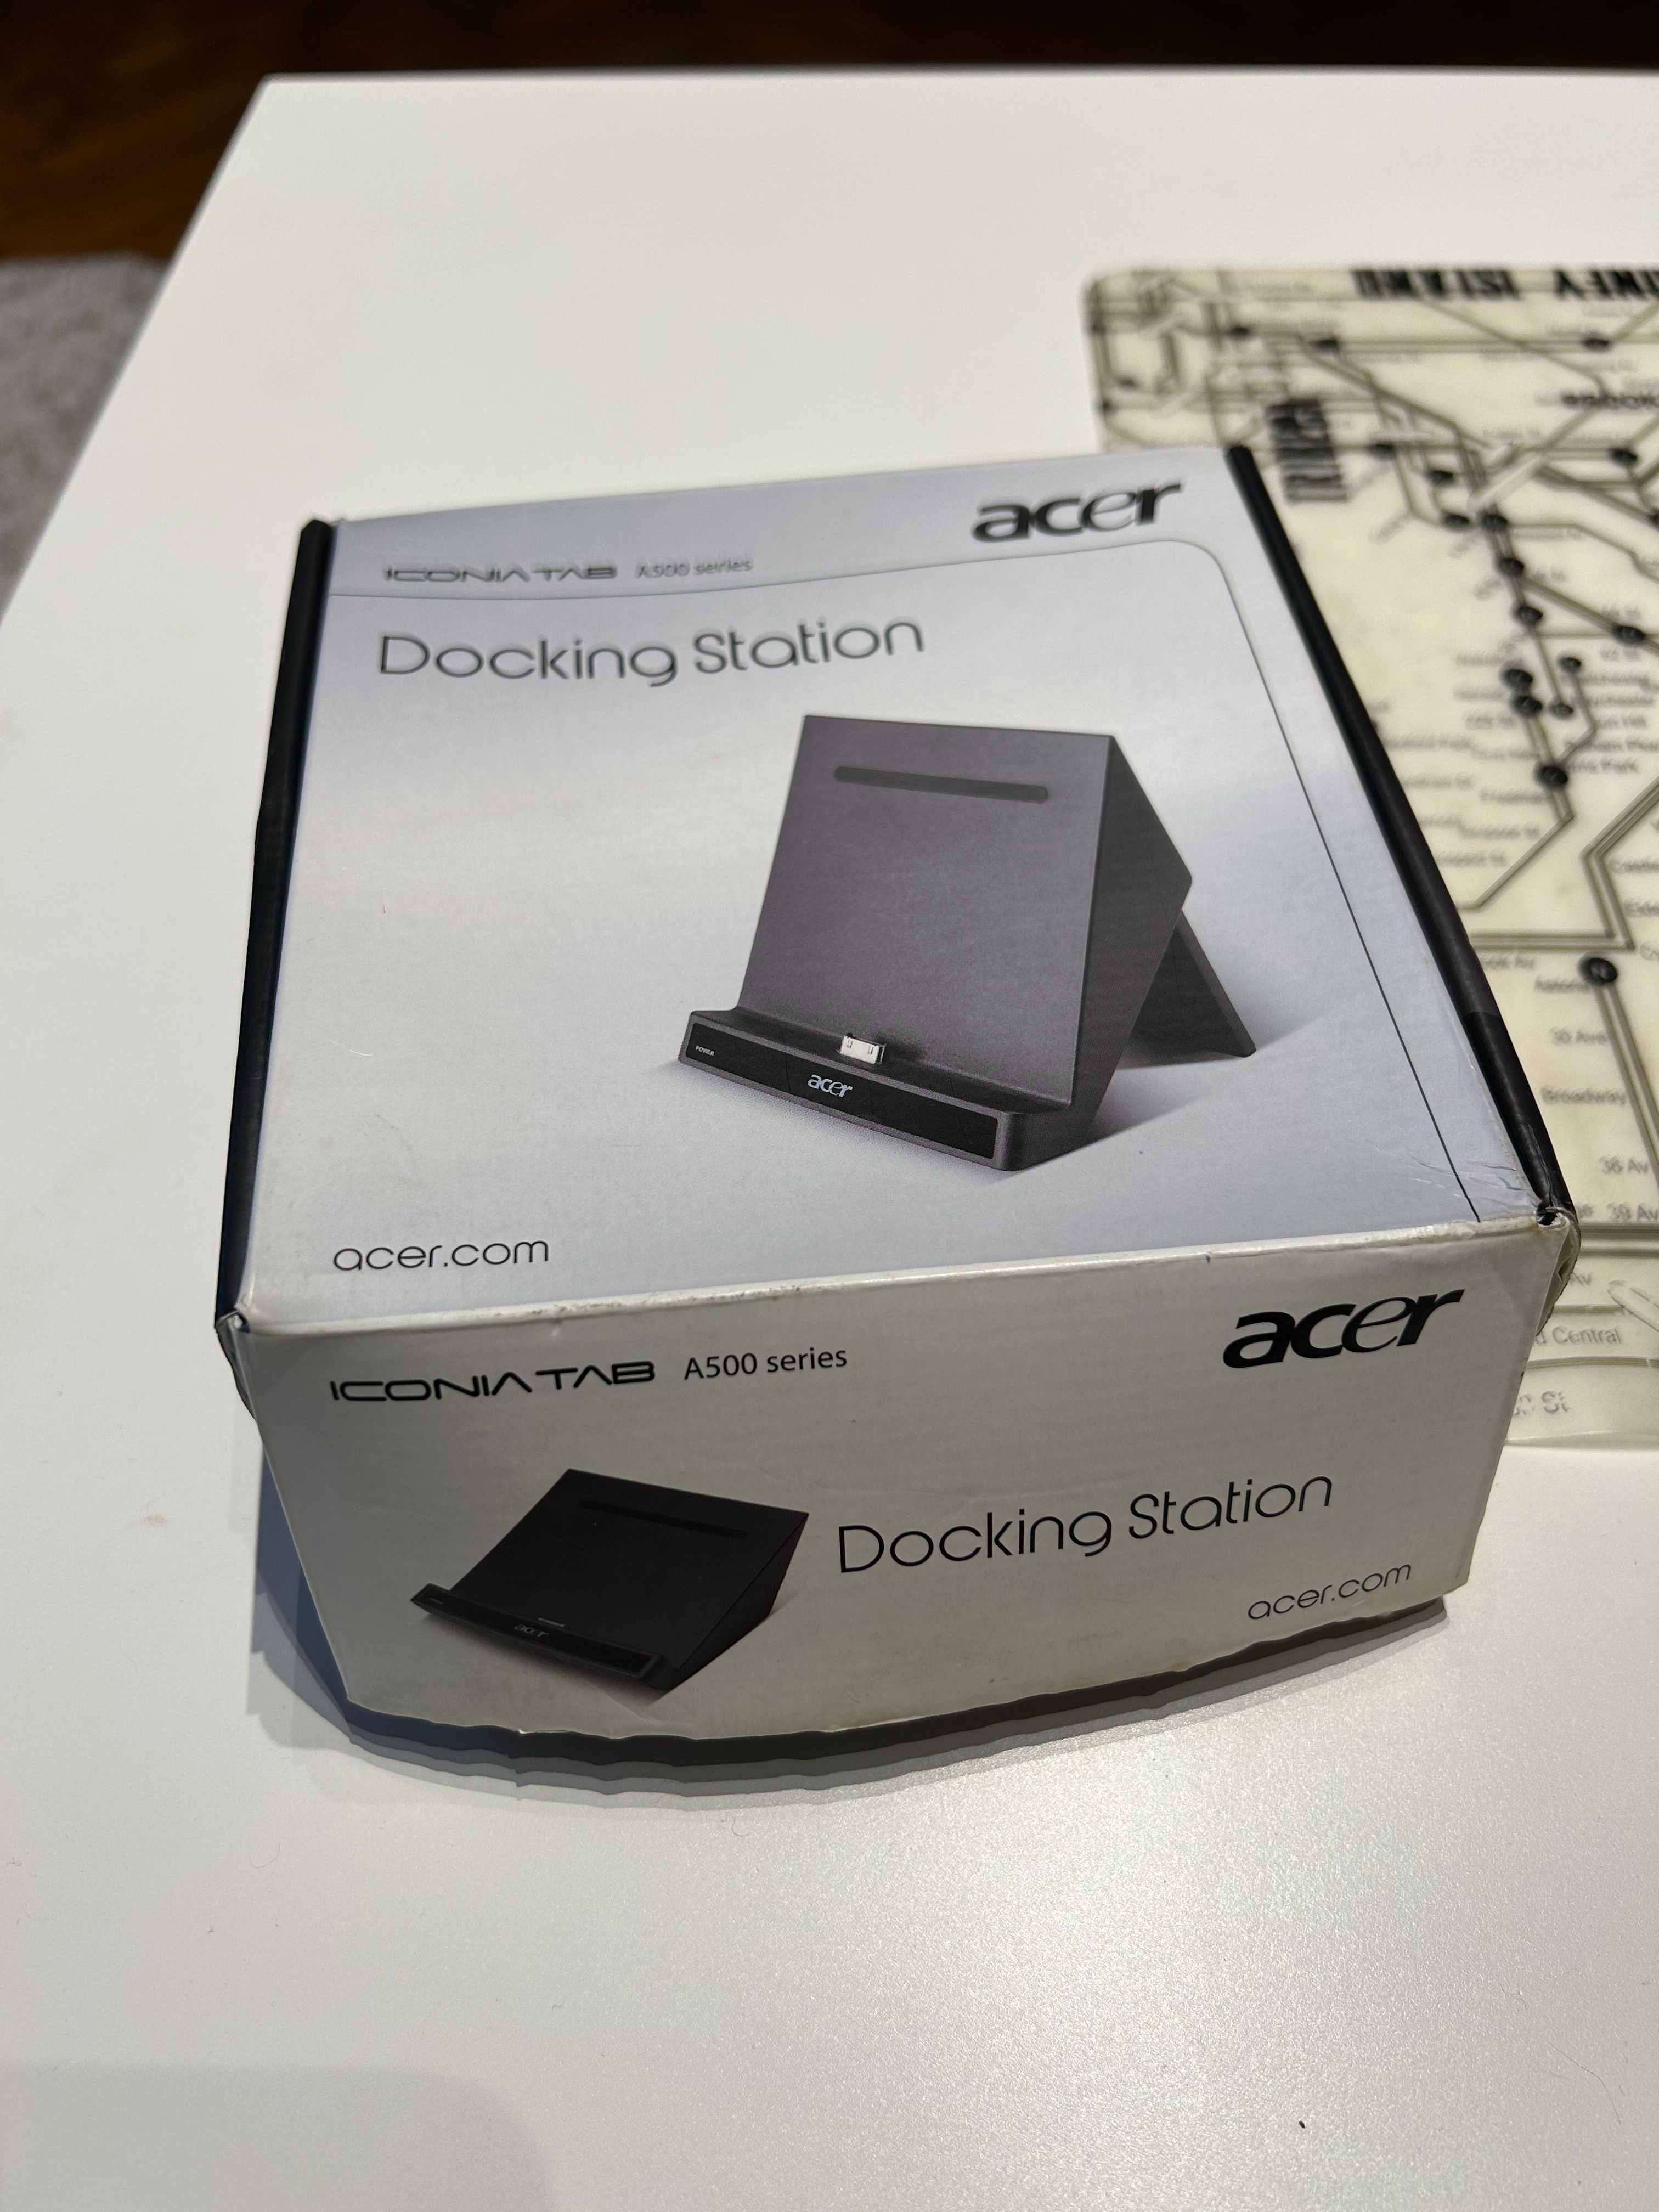 Acer Iconia Tab Docking station - ADT-002